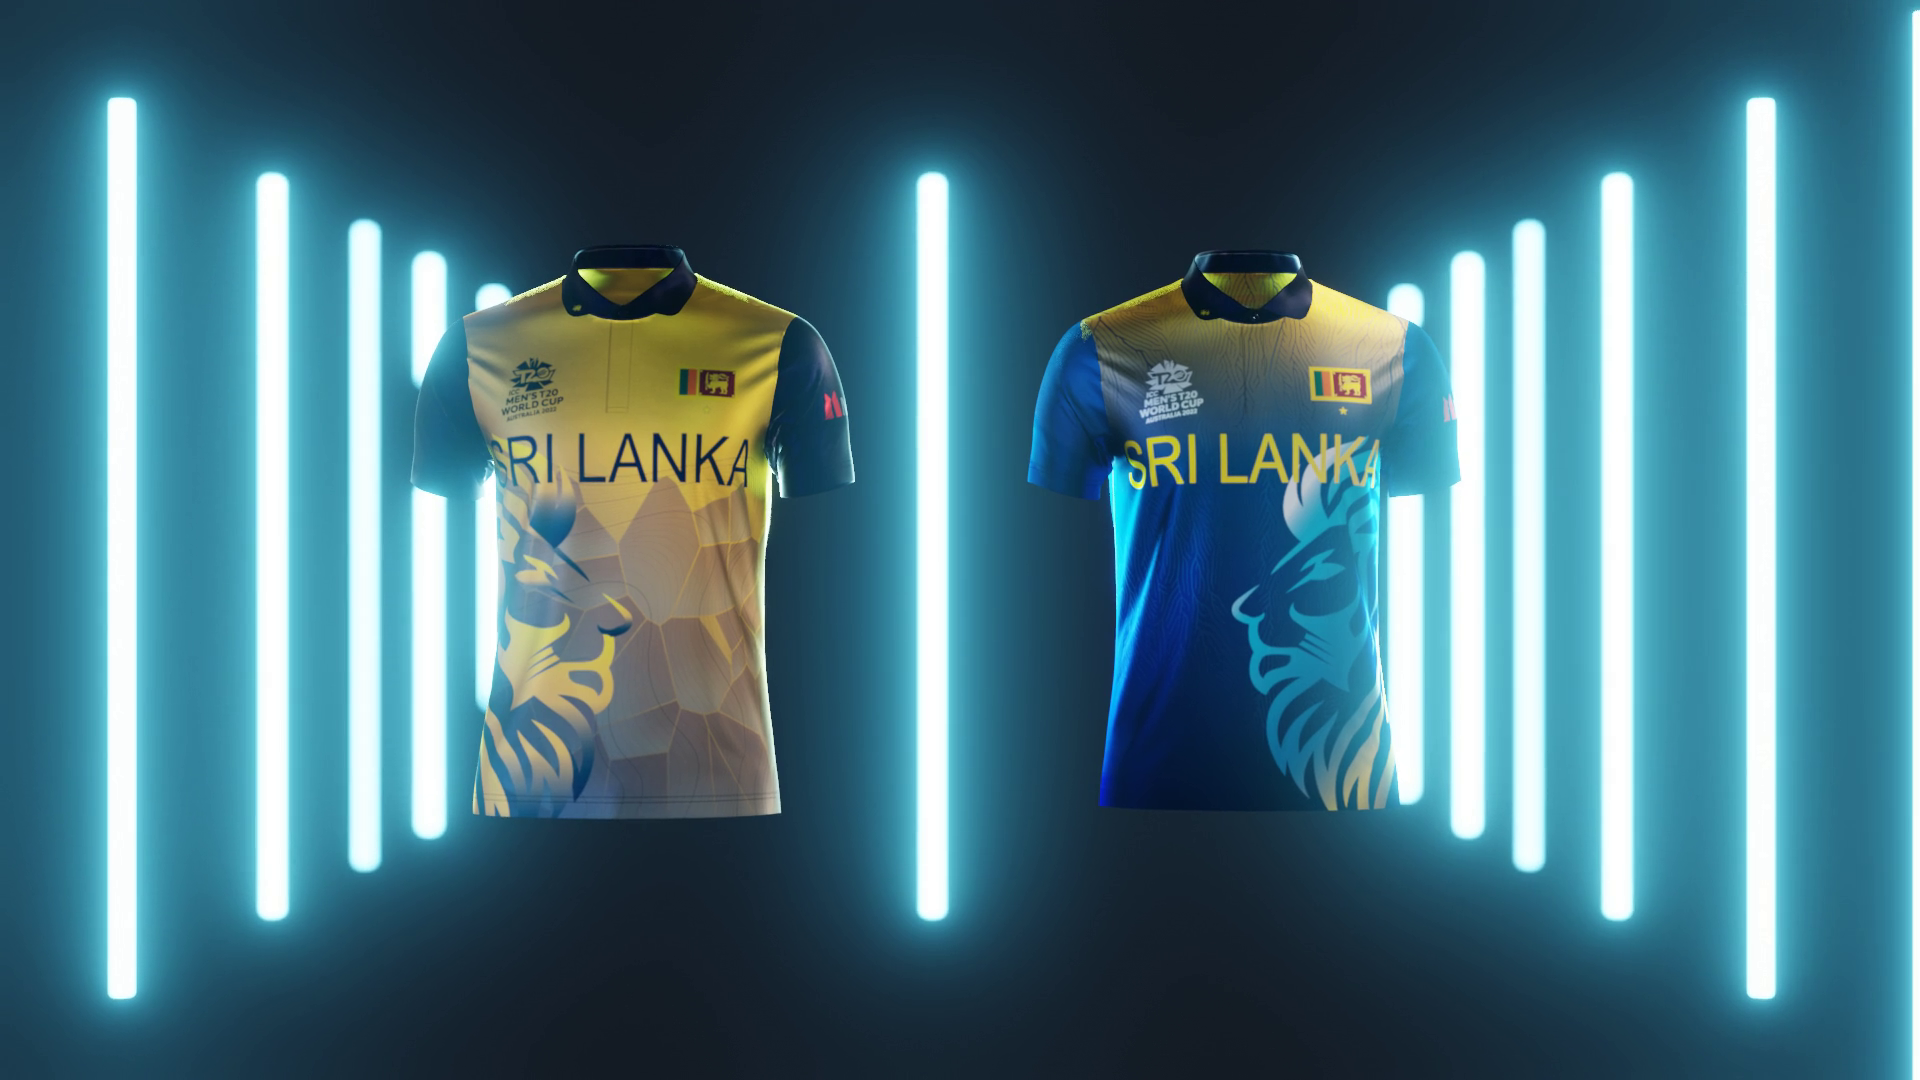 Sri Lankan T20 WC 2021 jerseys are made of recycled plastic waste